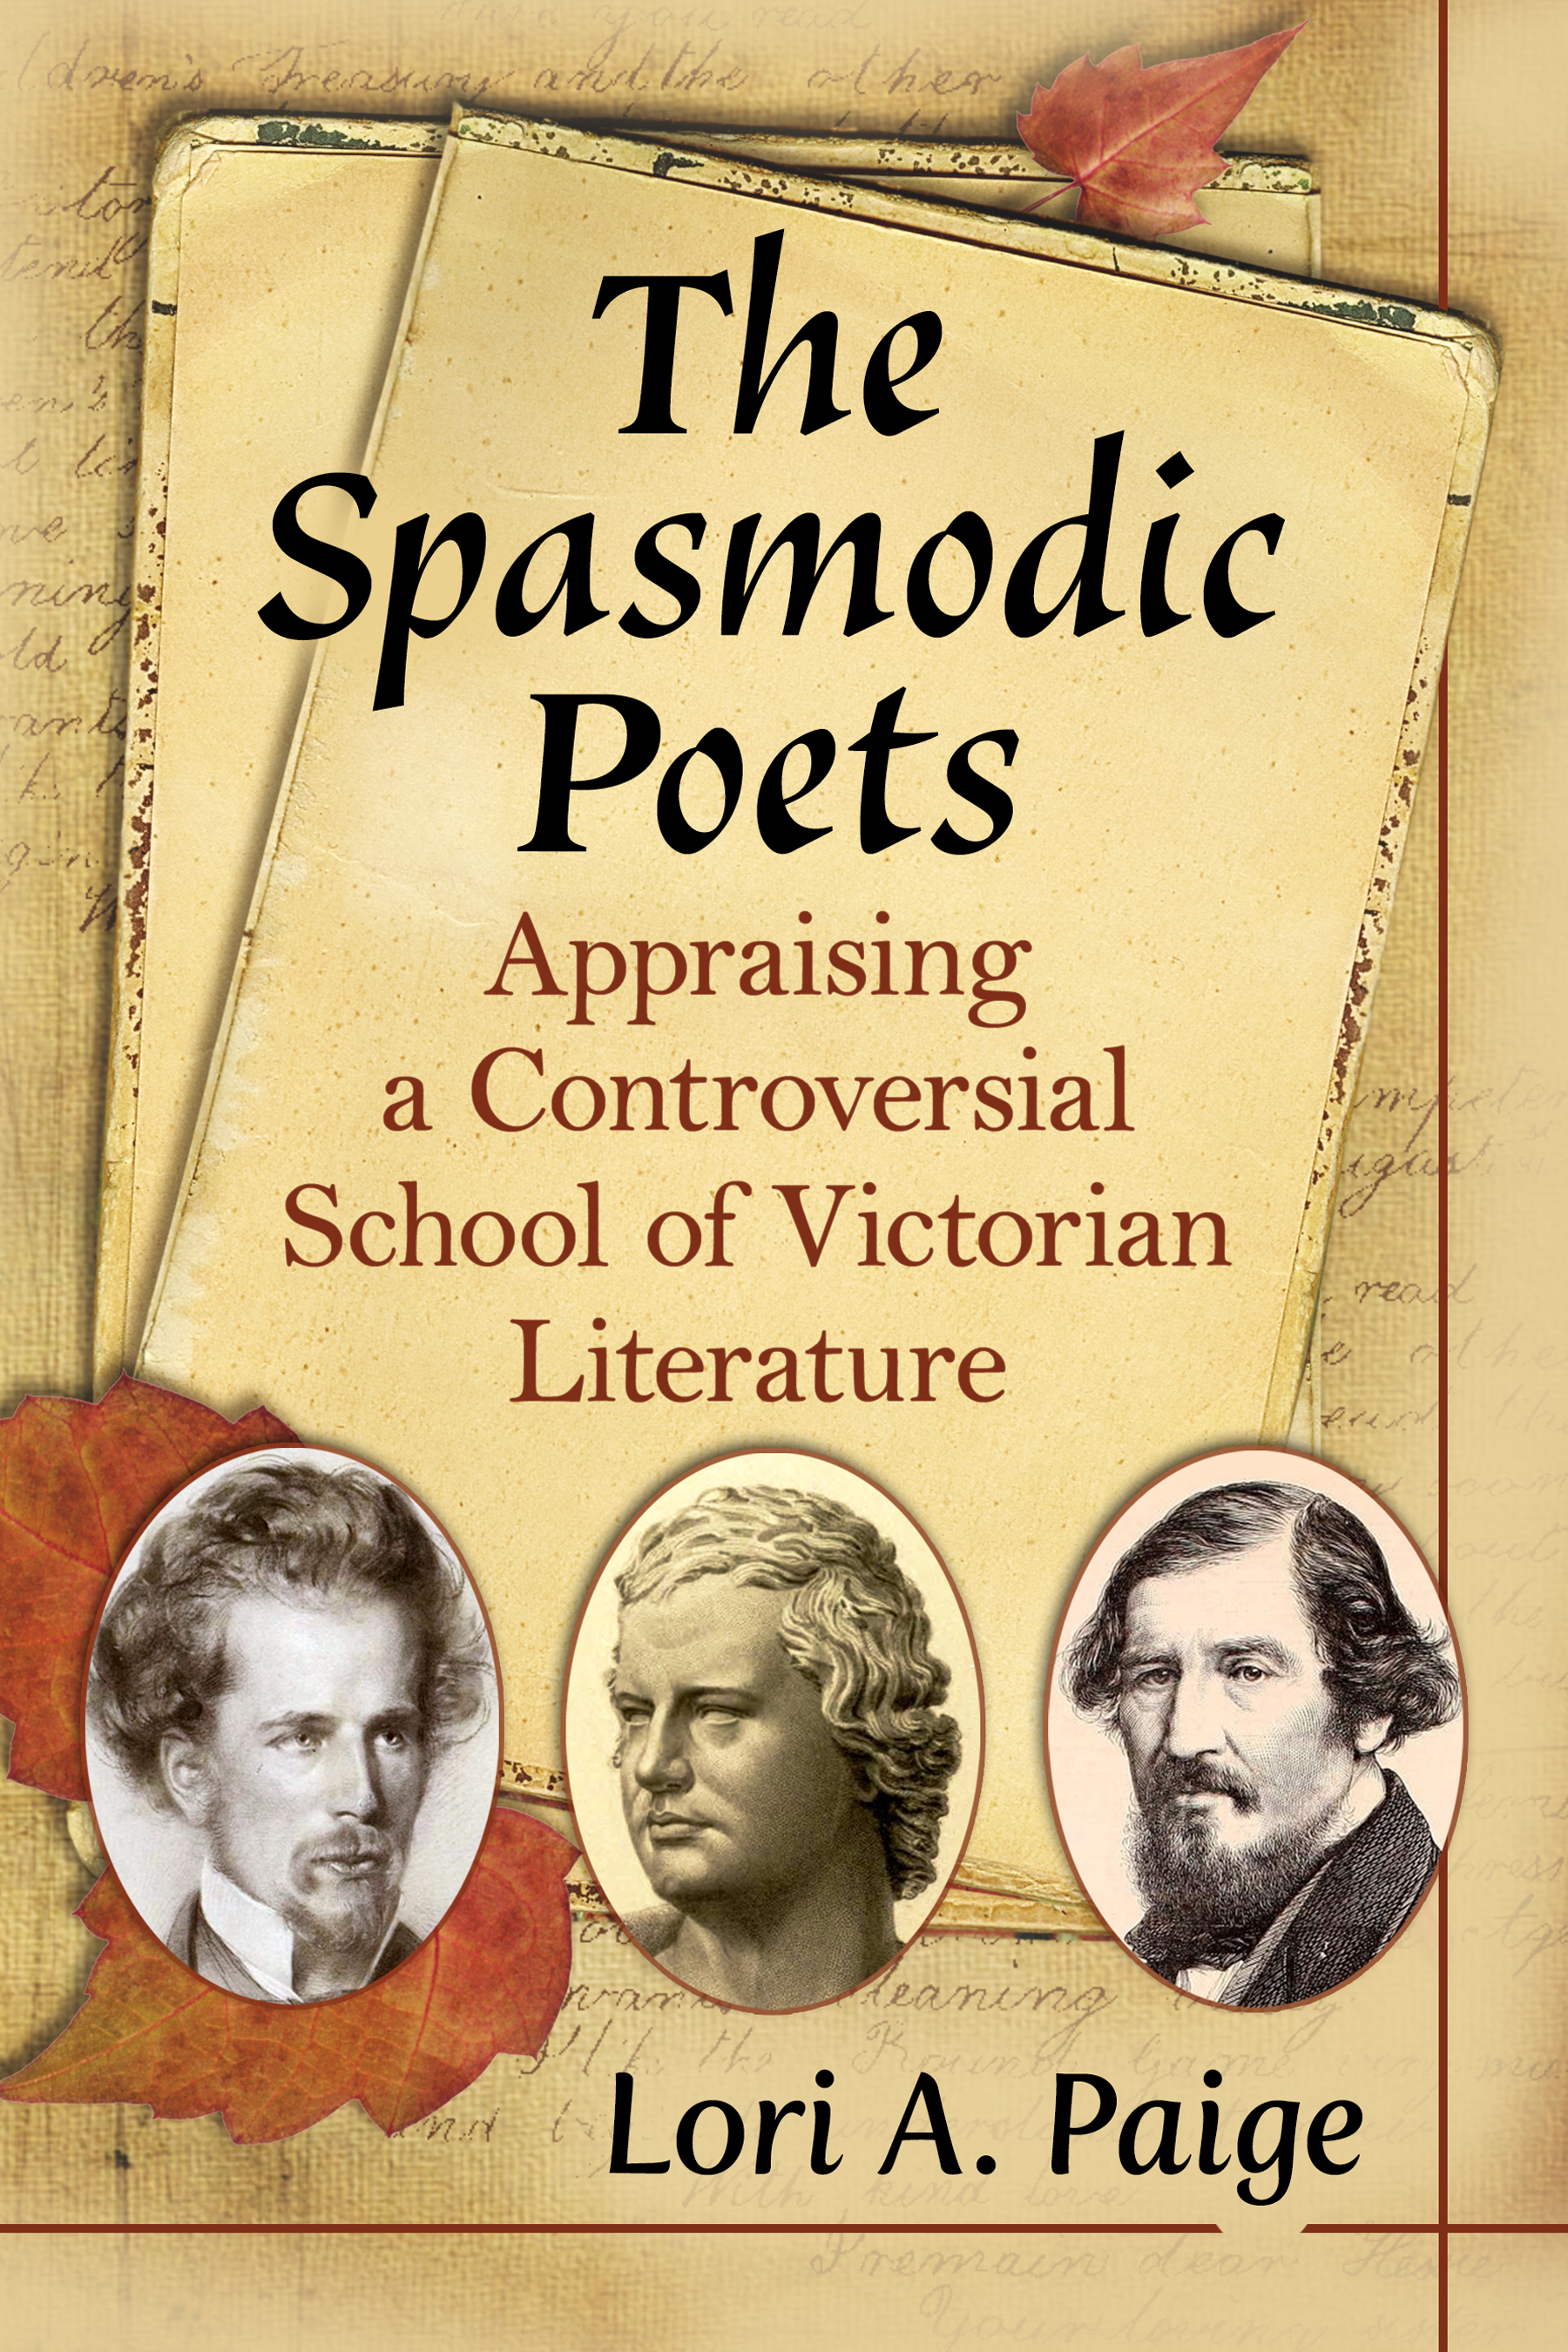 The Spasmodic Poets